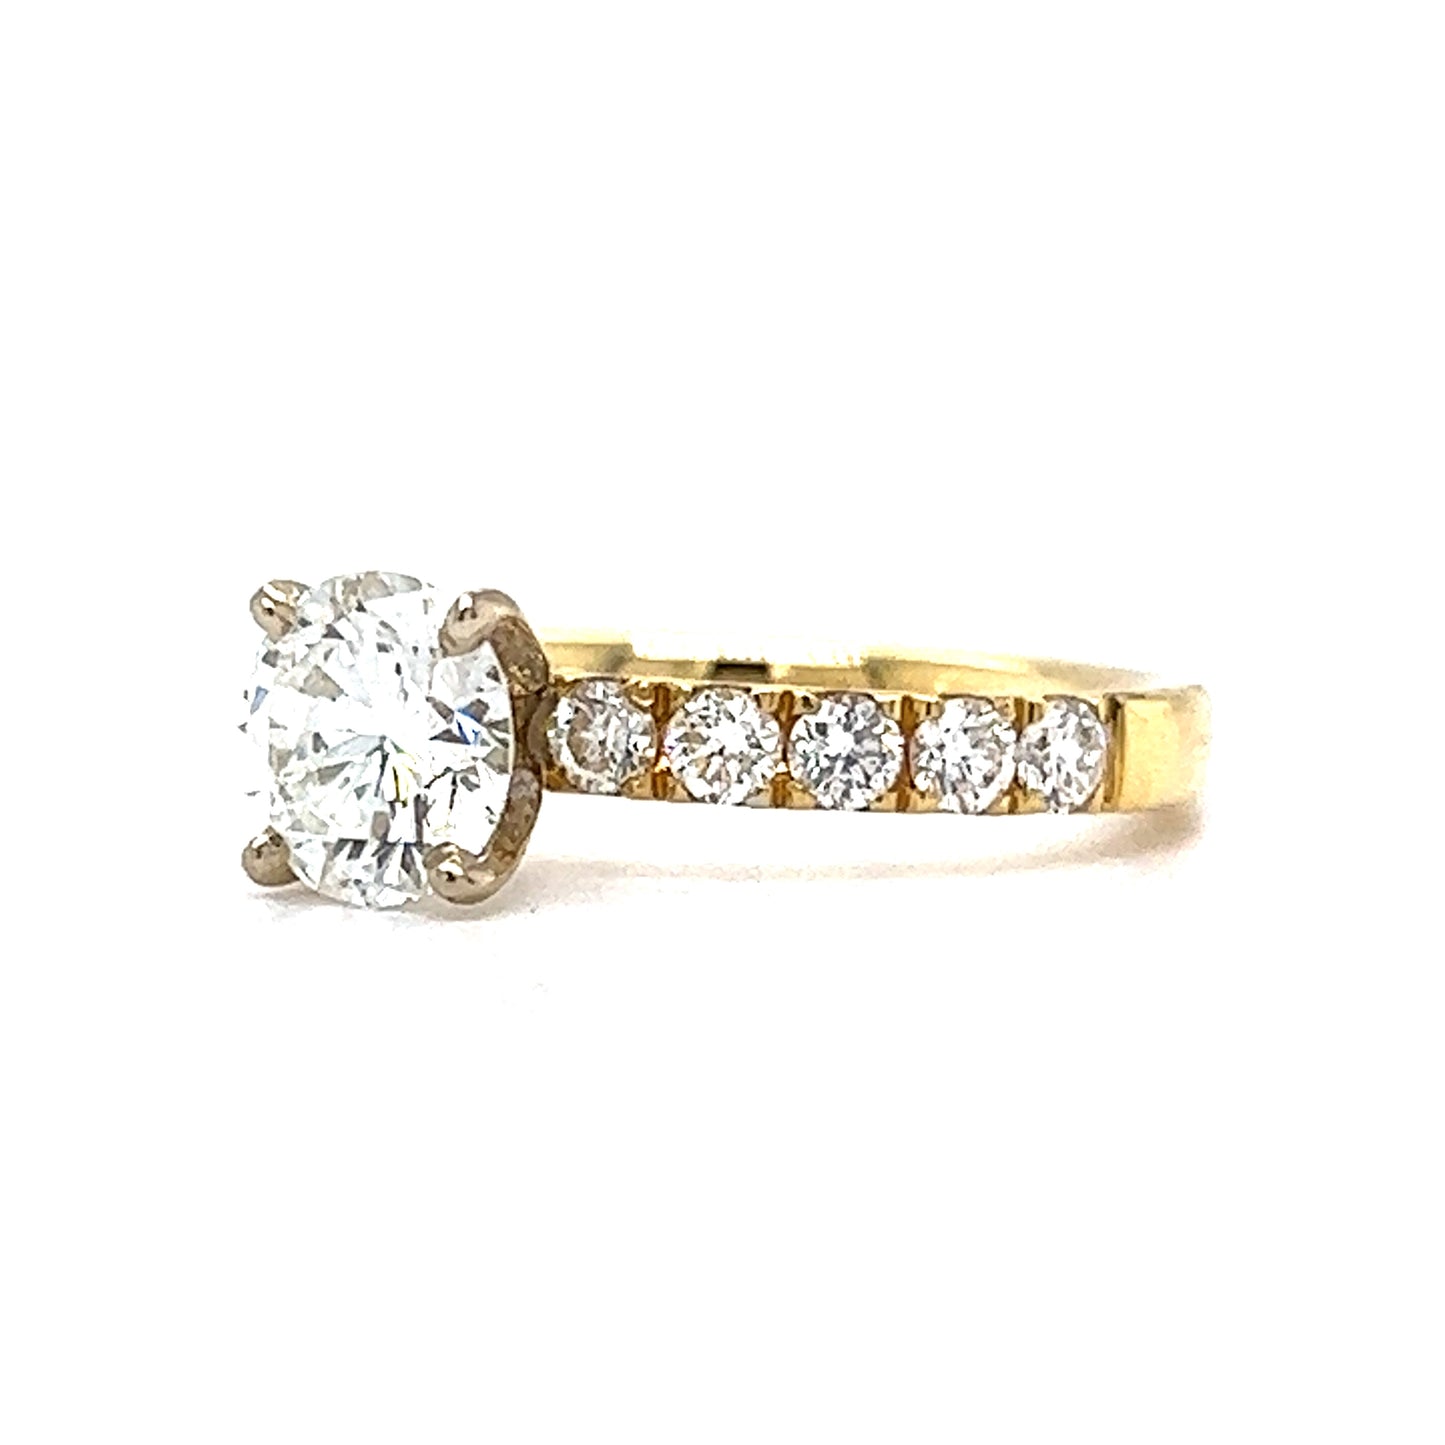 1.06 Solitaire Diamond Engagement Ring in 18k Yellow Gold